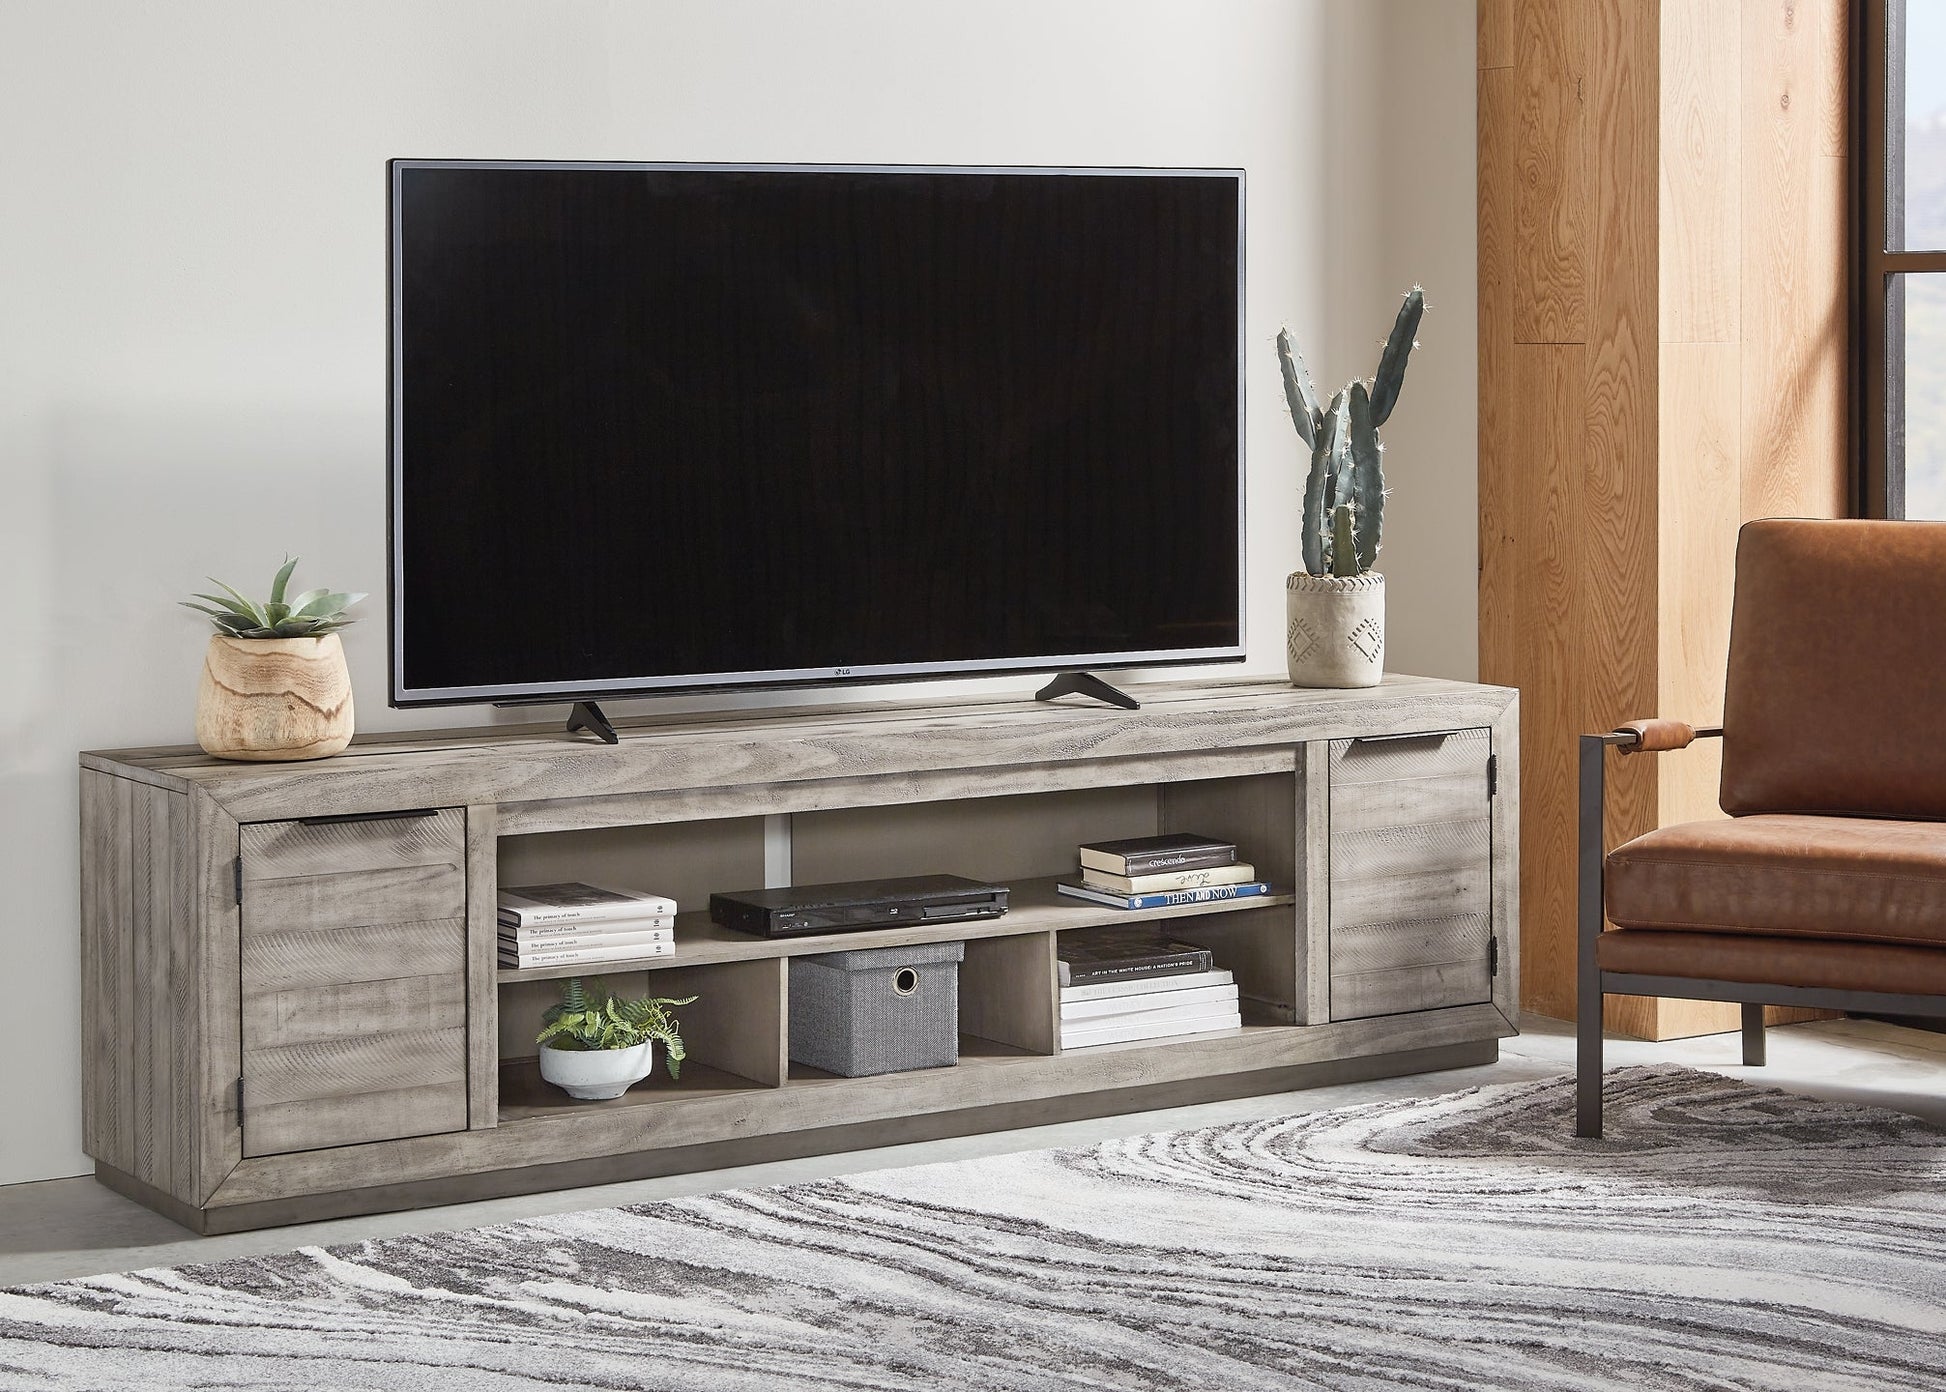 Naydell XL TV Stand w/Fireplace Option at Cloud 9 Mattress & Furniture furniture, home furnishing, home decor